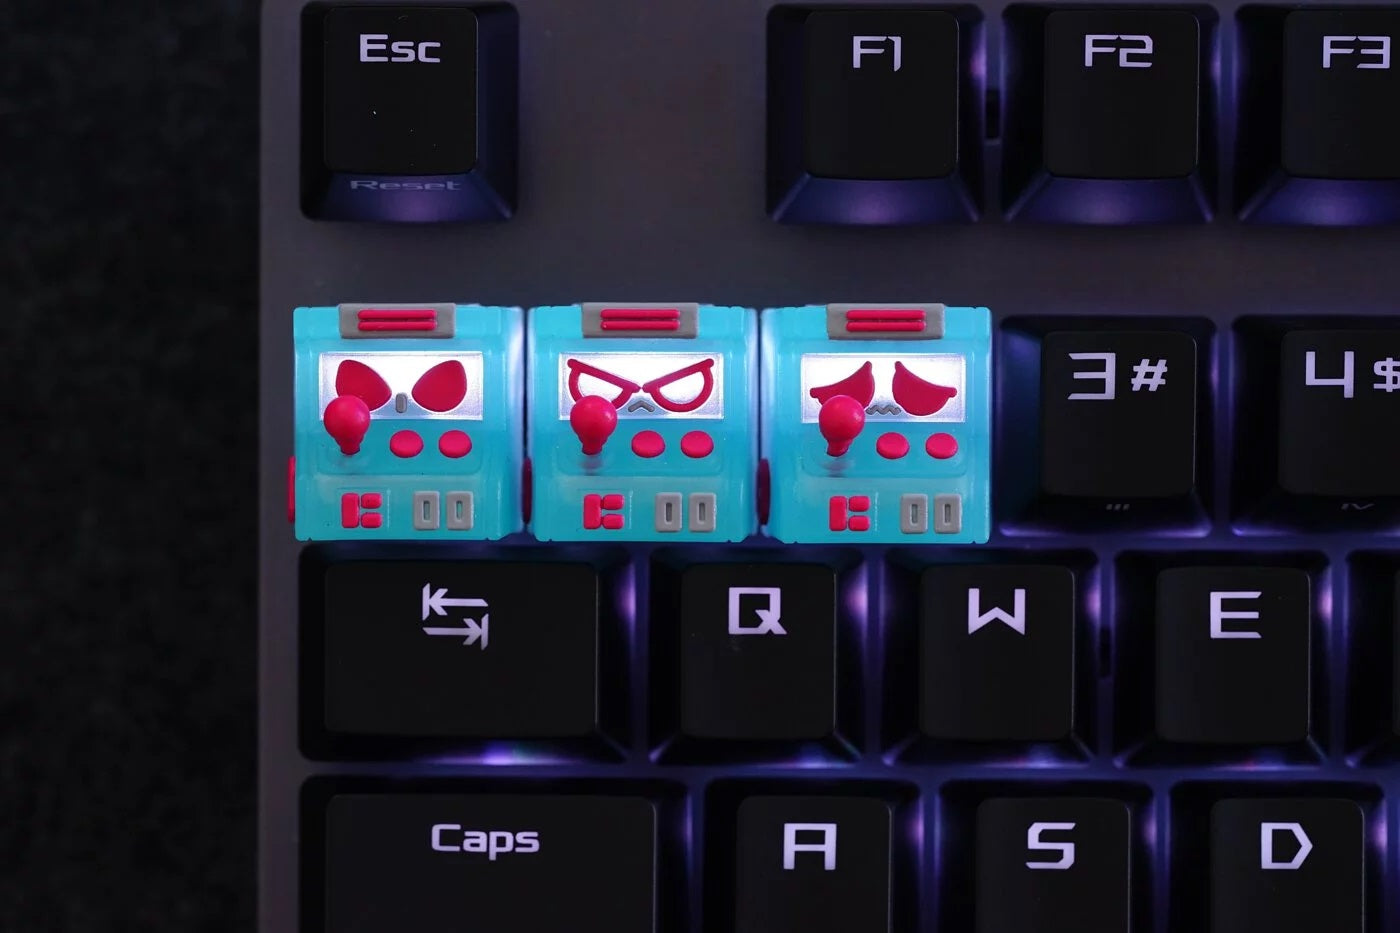 Hot Keys Project HKP Error Keycap Angry Trans Blue Red Artisan Keycap MKH5HDAL93 |35305|